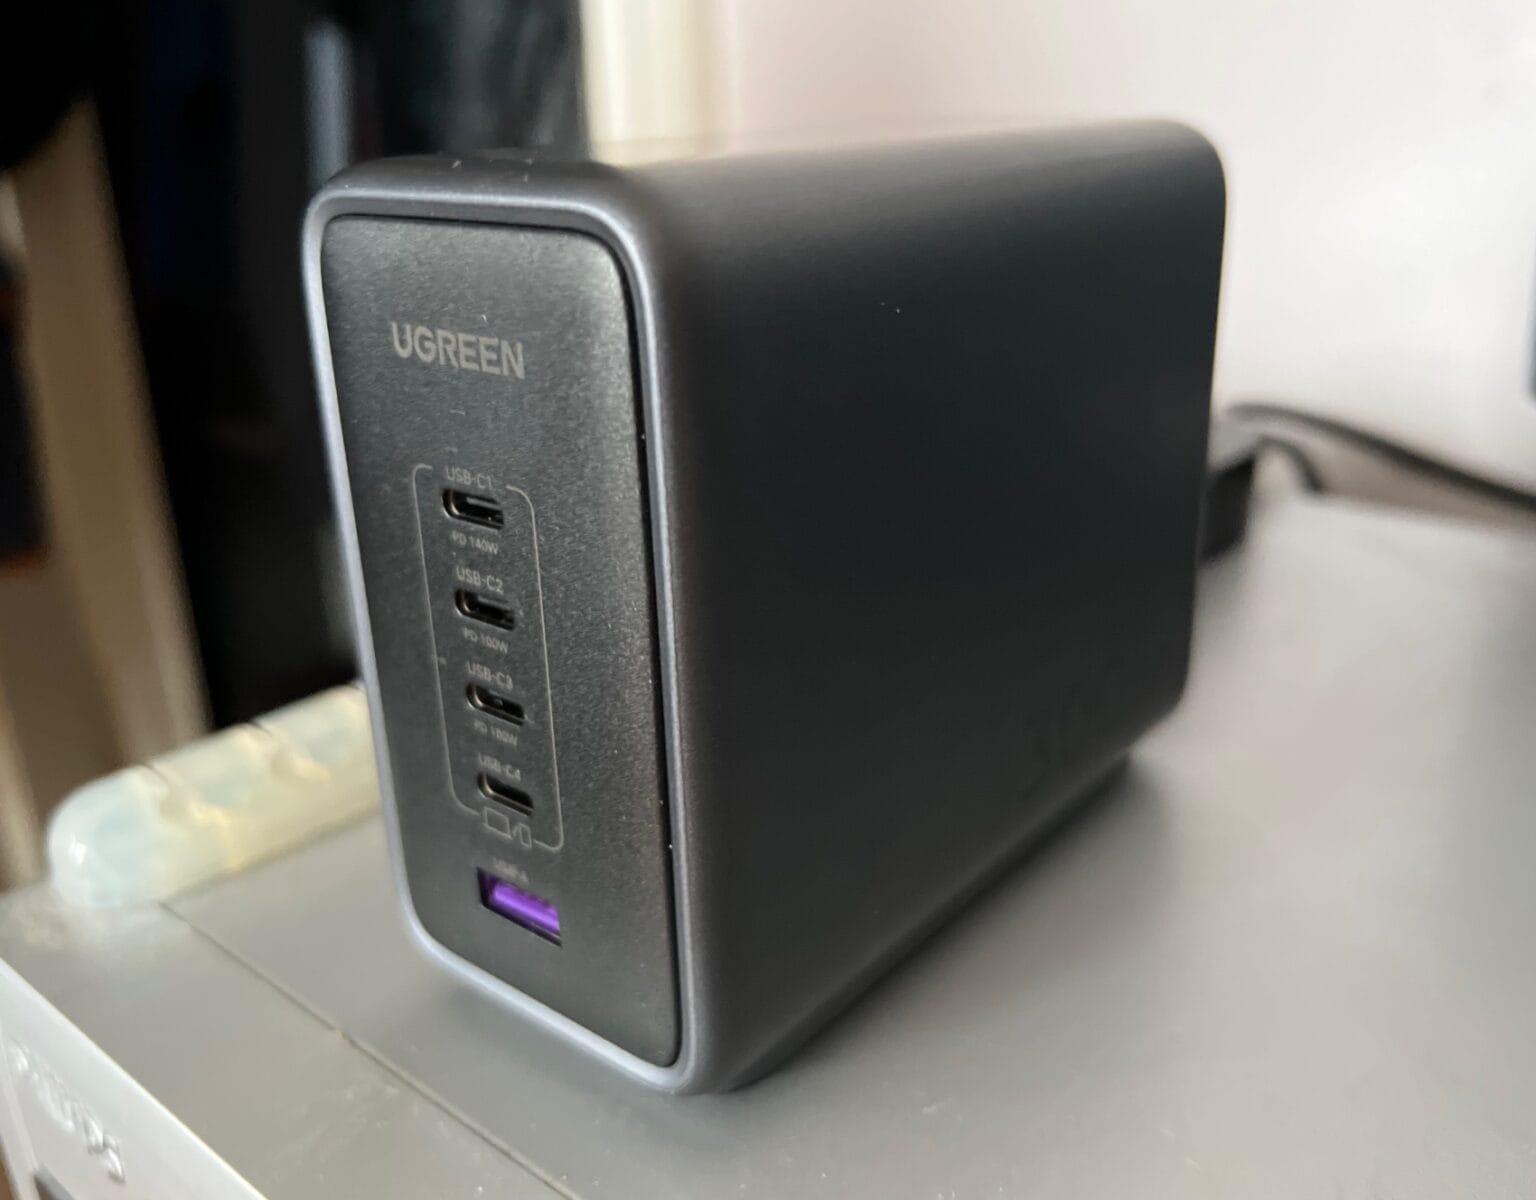 It's a bit big for portability, but Ugreen's new 300W GaN charger easily juices up your devices at home or at work.